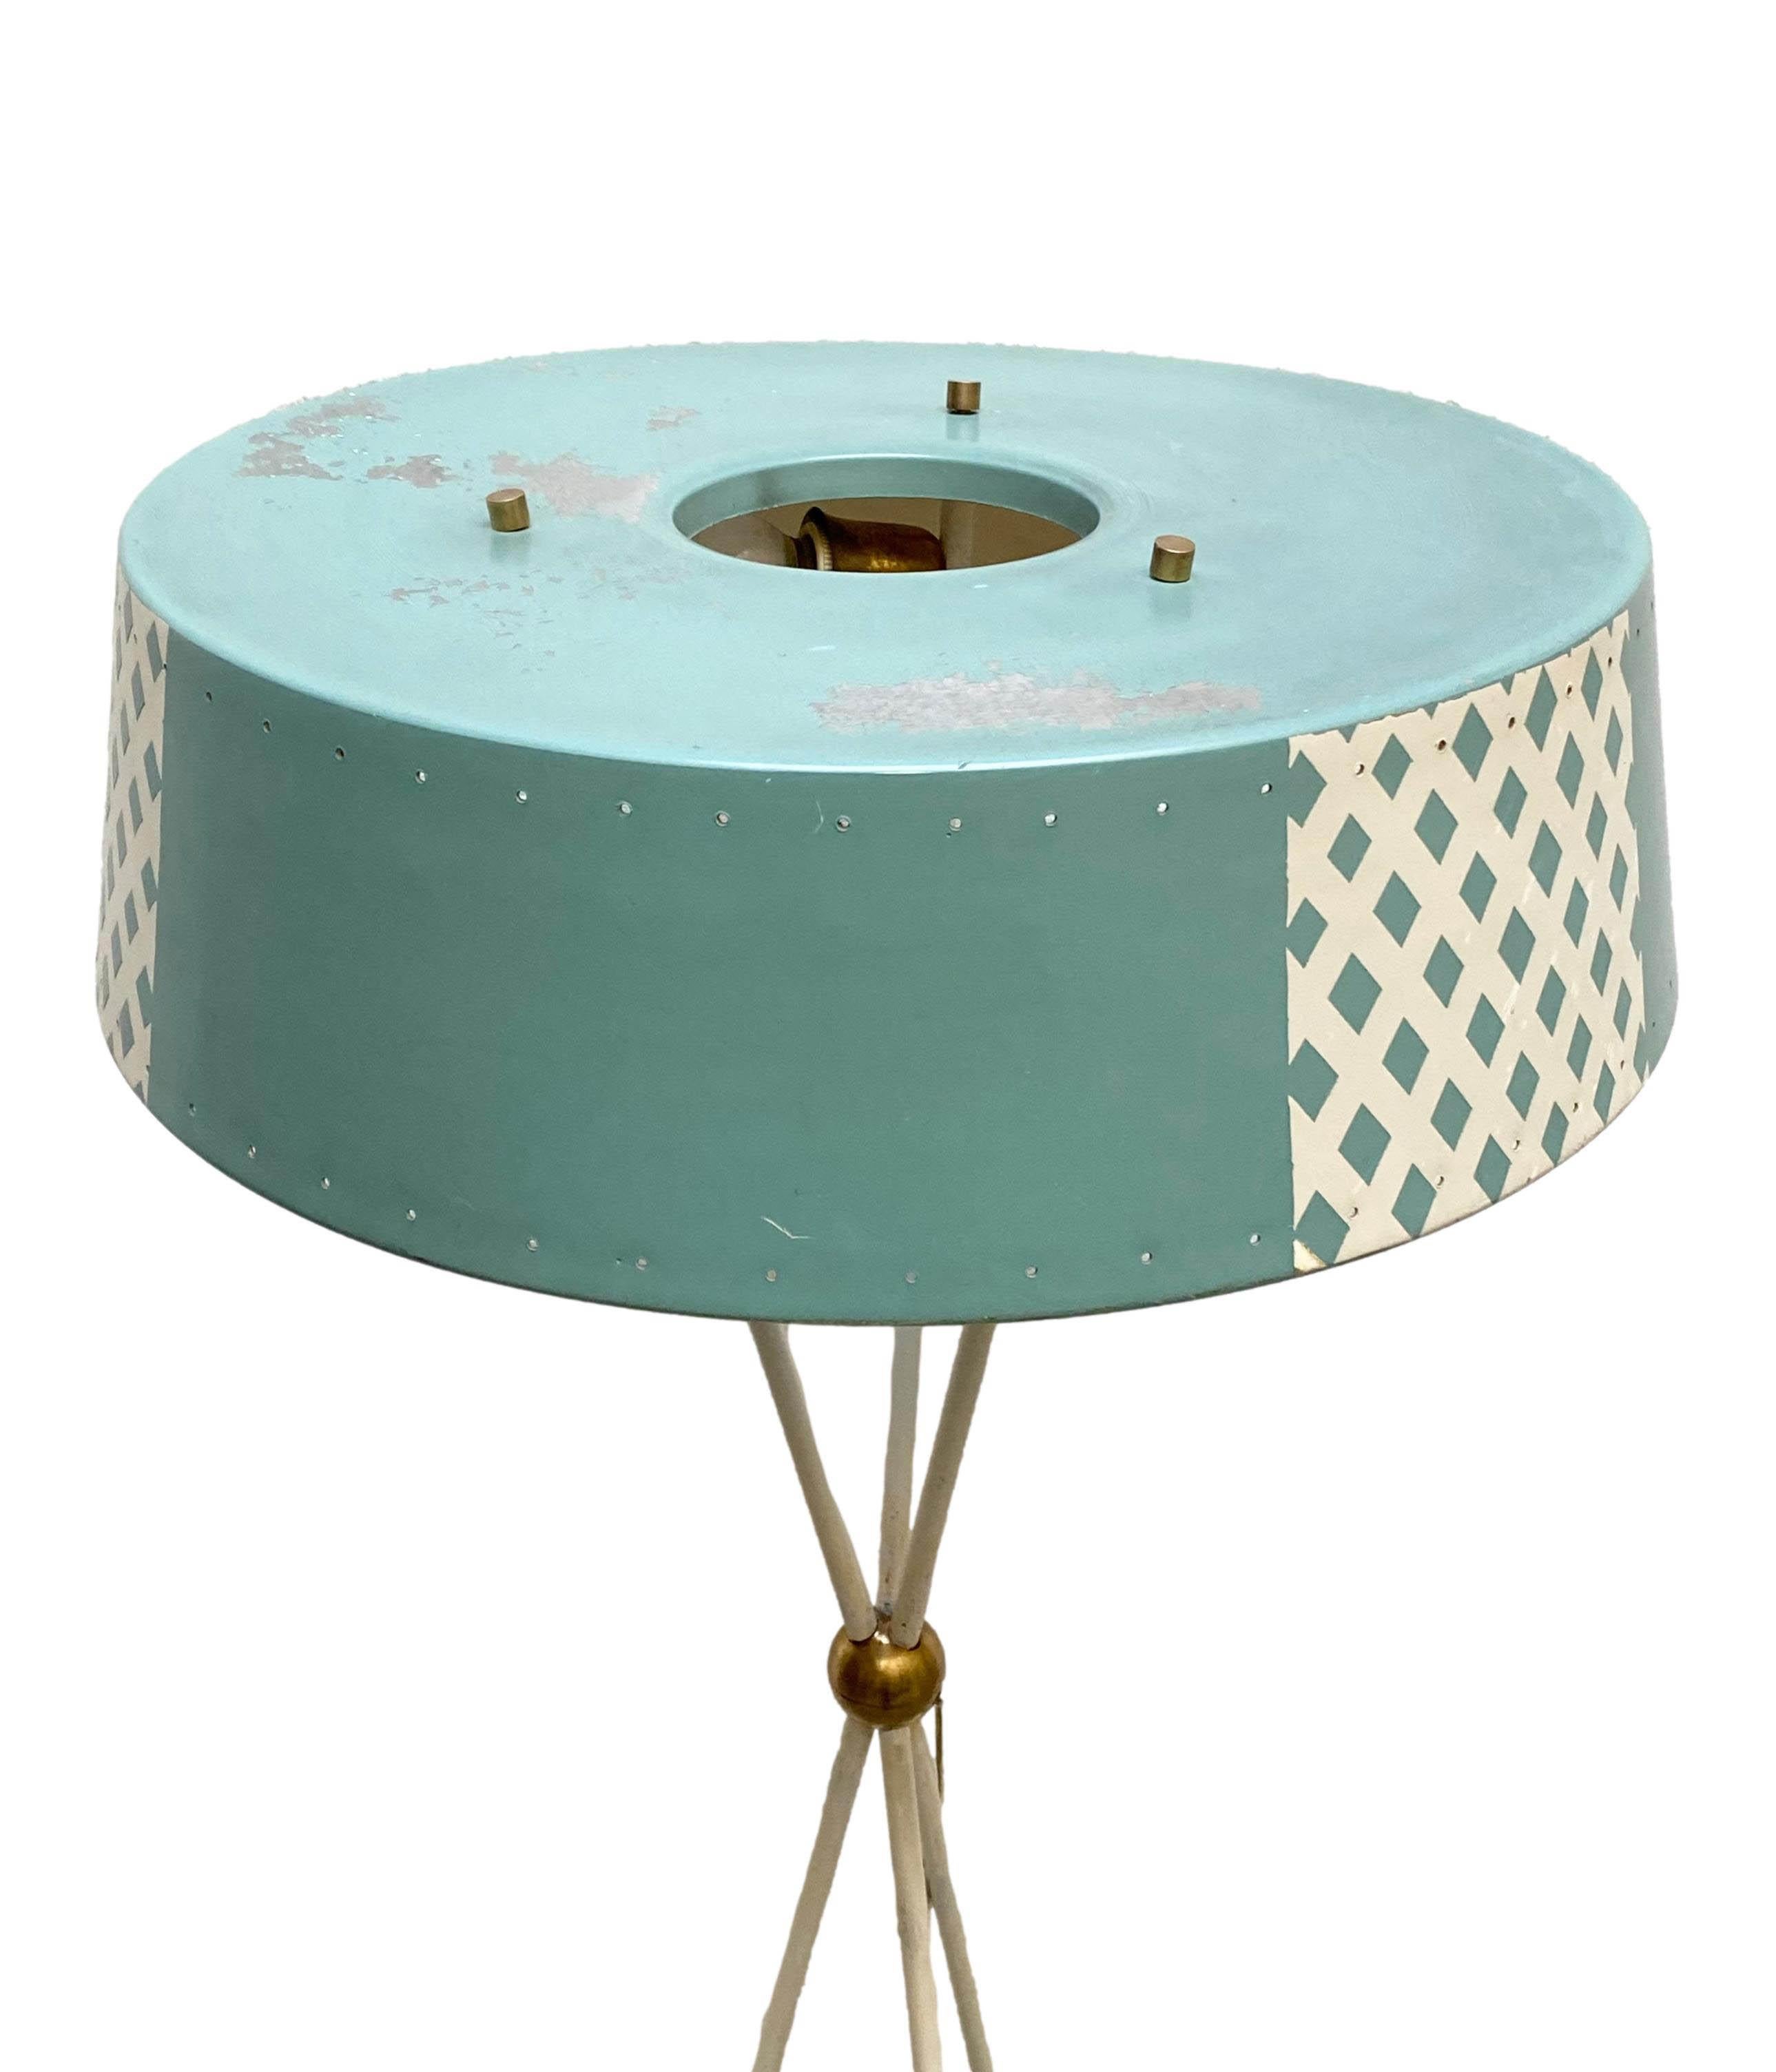 Stilnovo, rare table lamp with metal and brass cap, three metal legs with brass finials.
The pastel blue color is original and fairly well preserved.
Stilnovo production 1950ca.